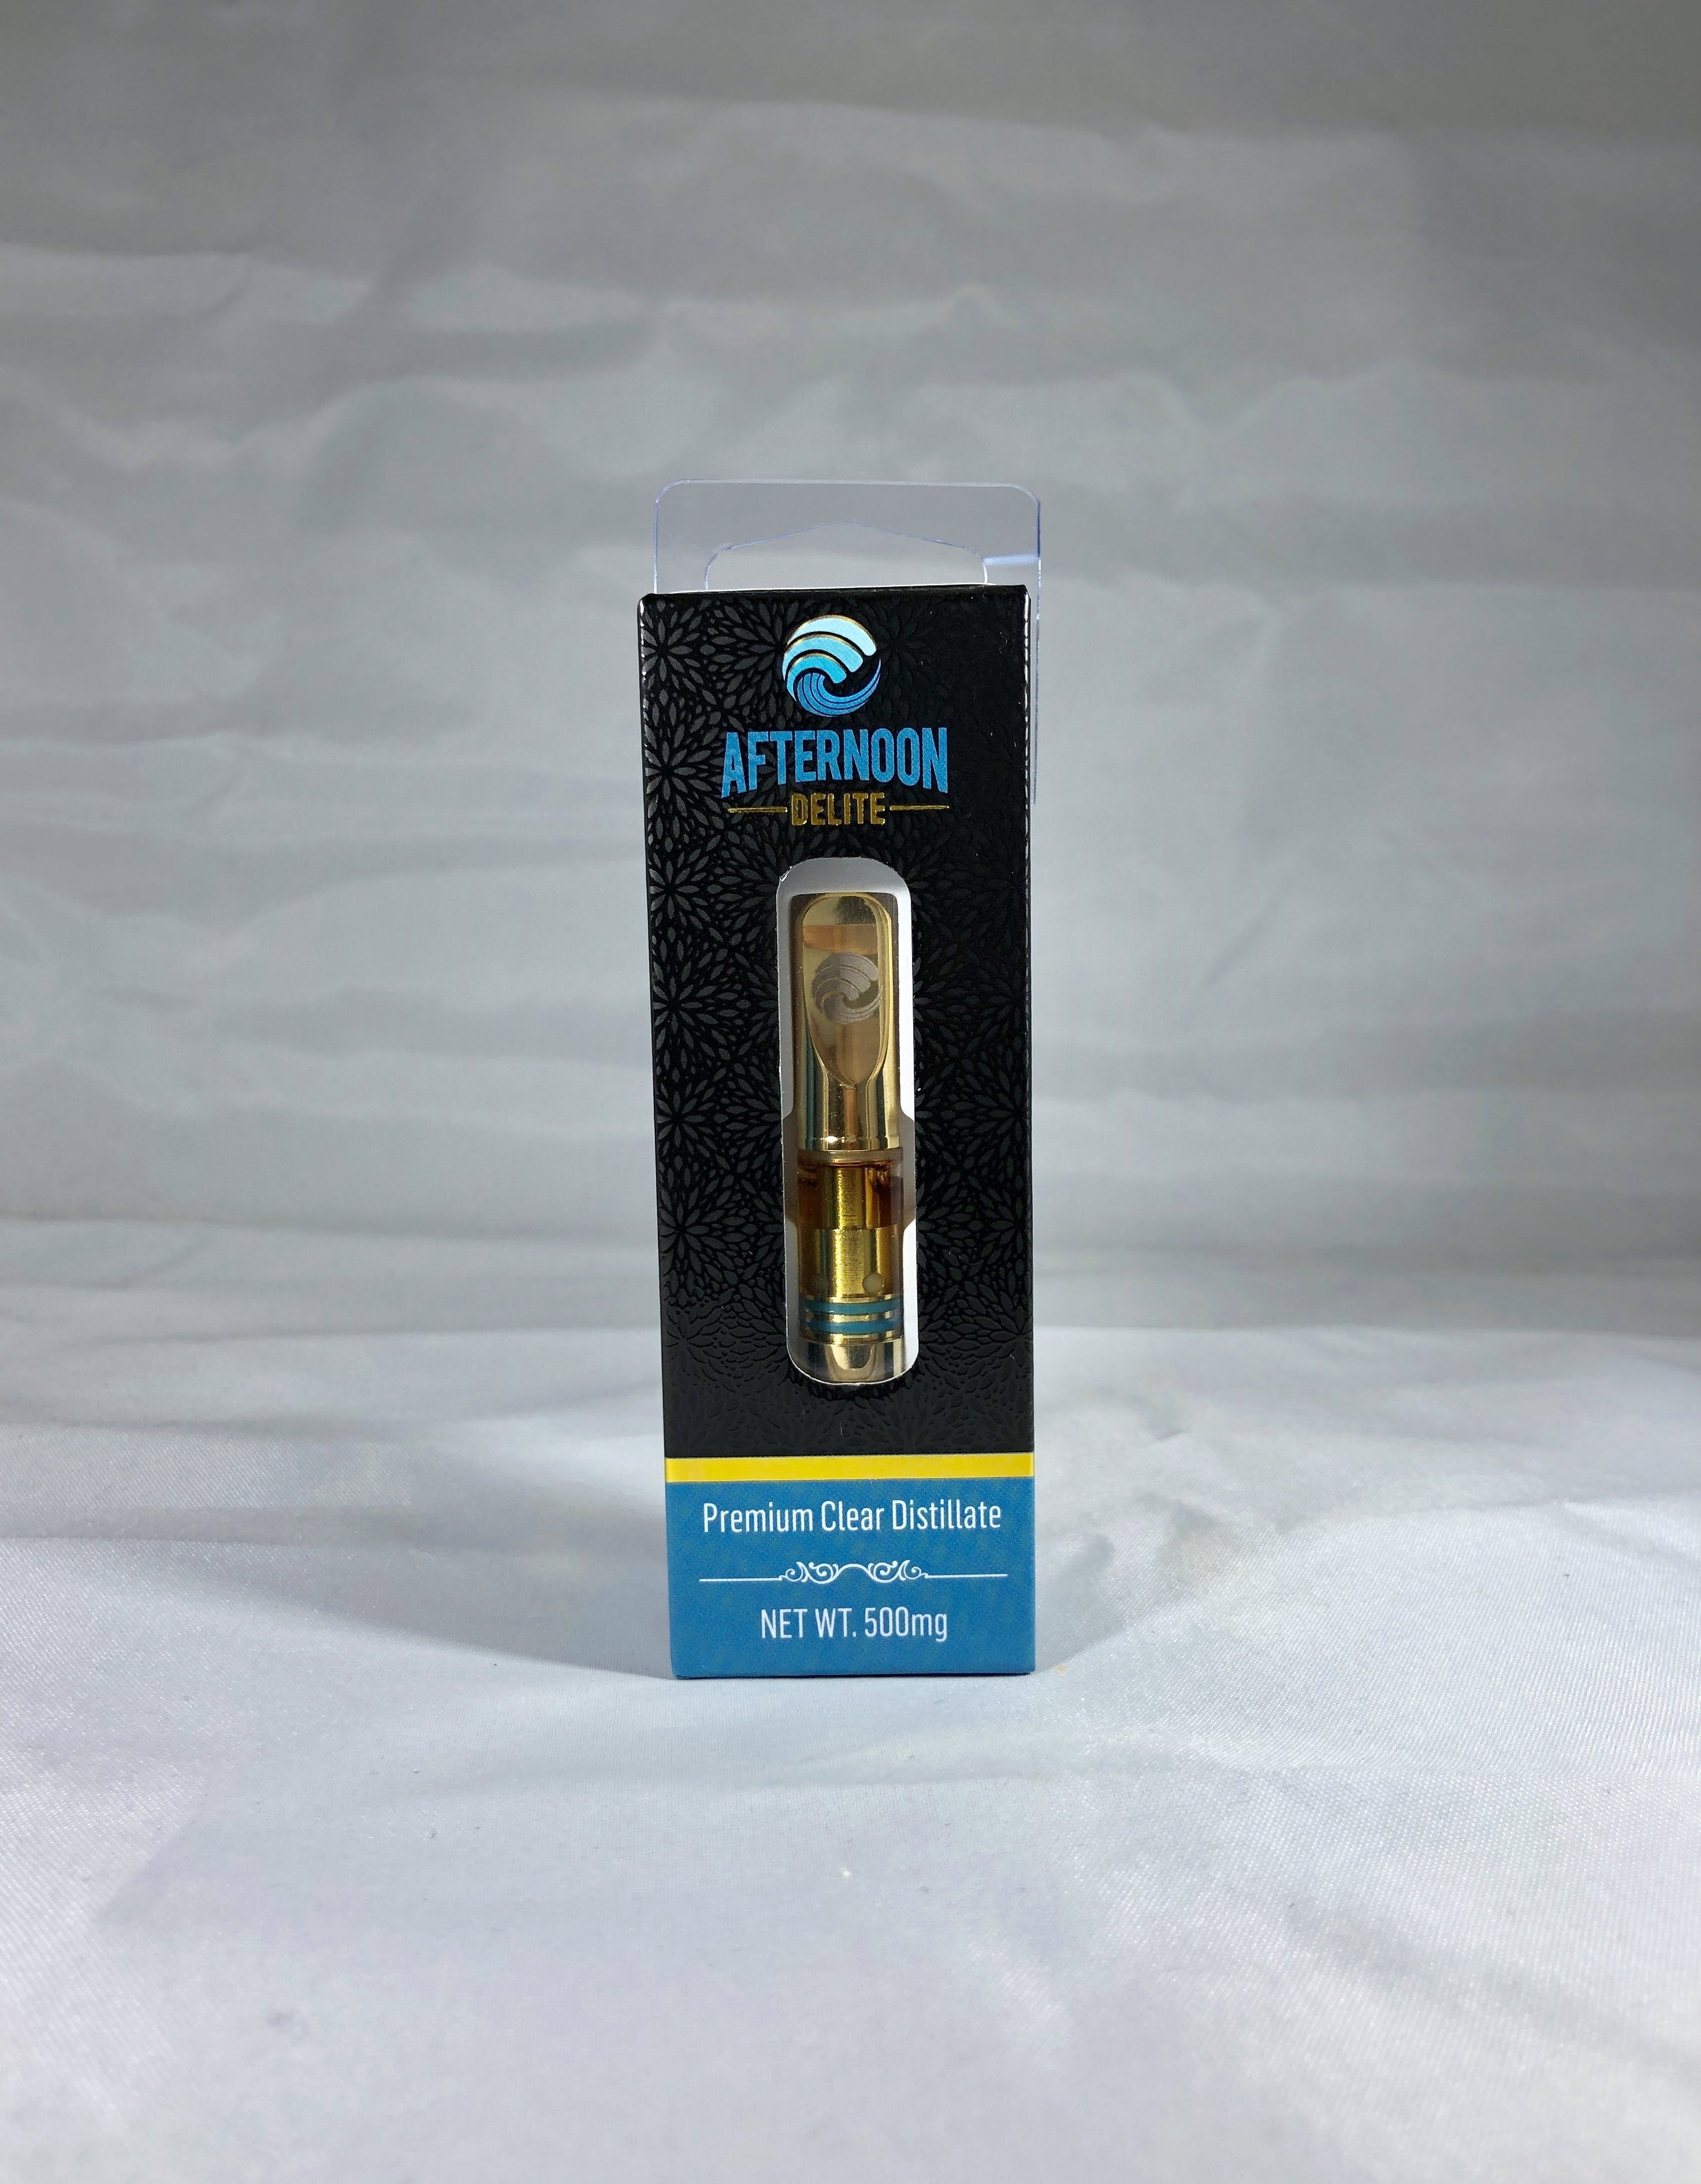 concentrate-afternoon-delite-cartridges